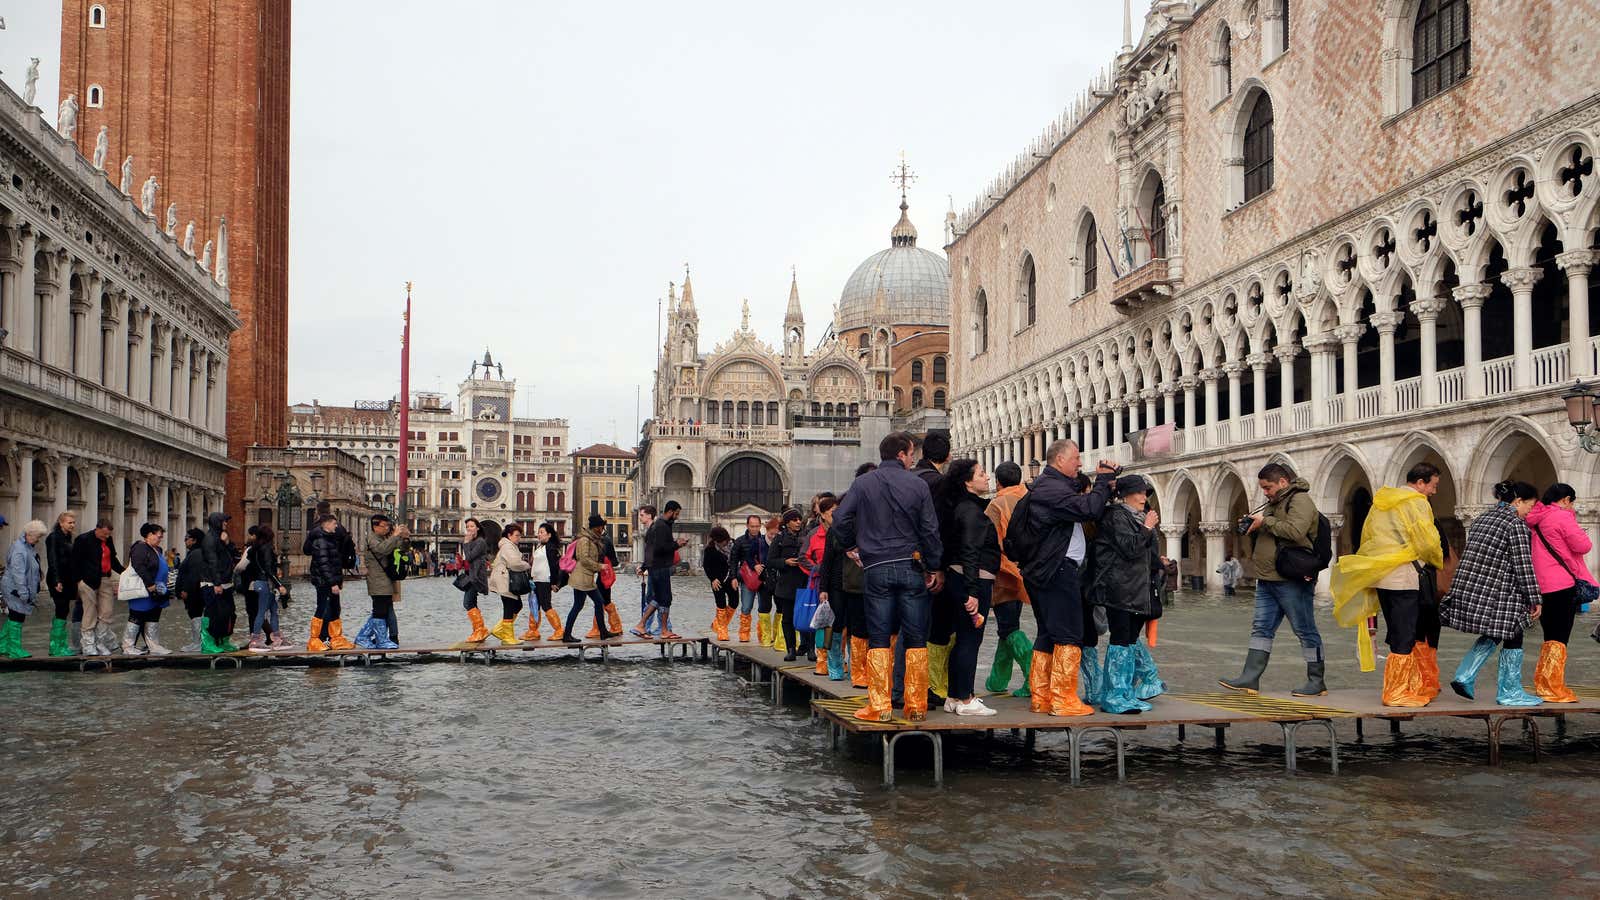 Can we save Venice?